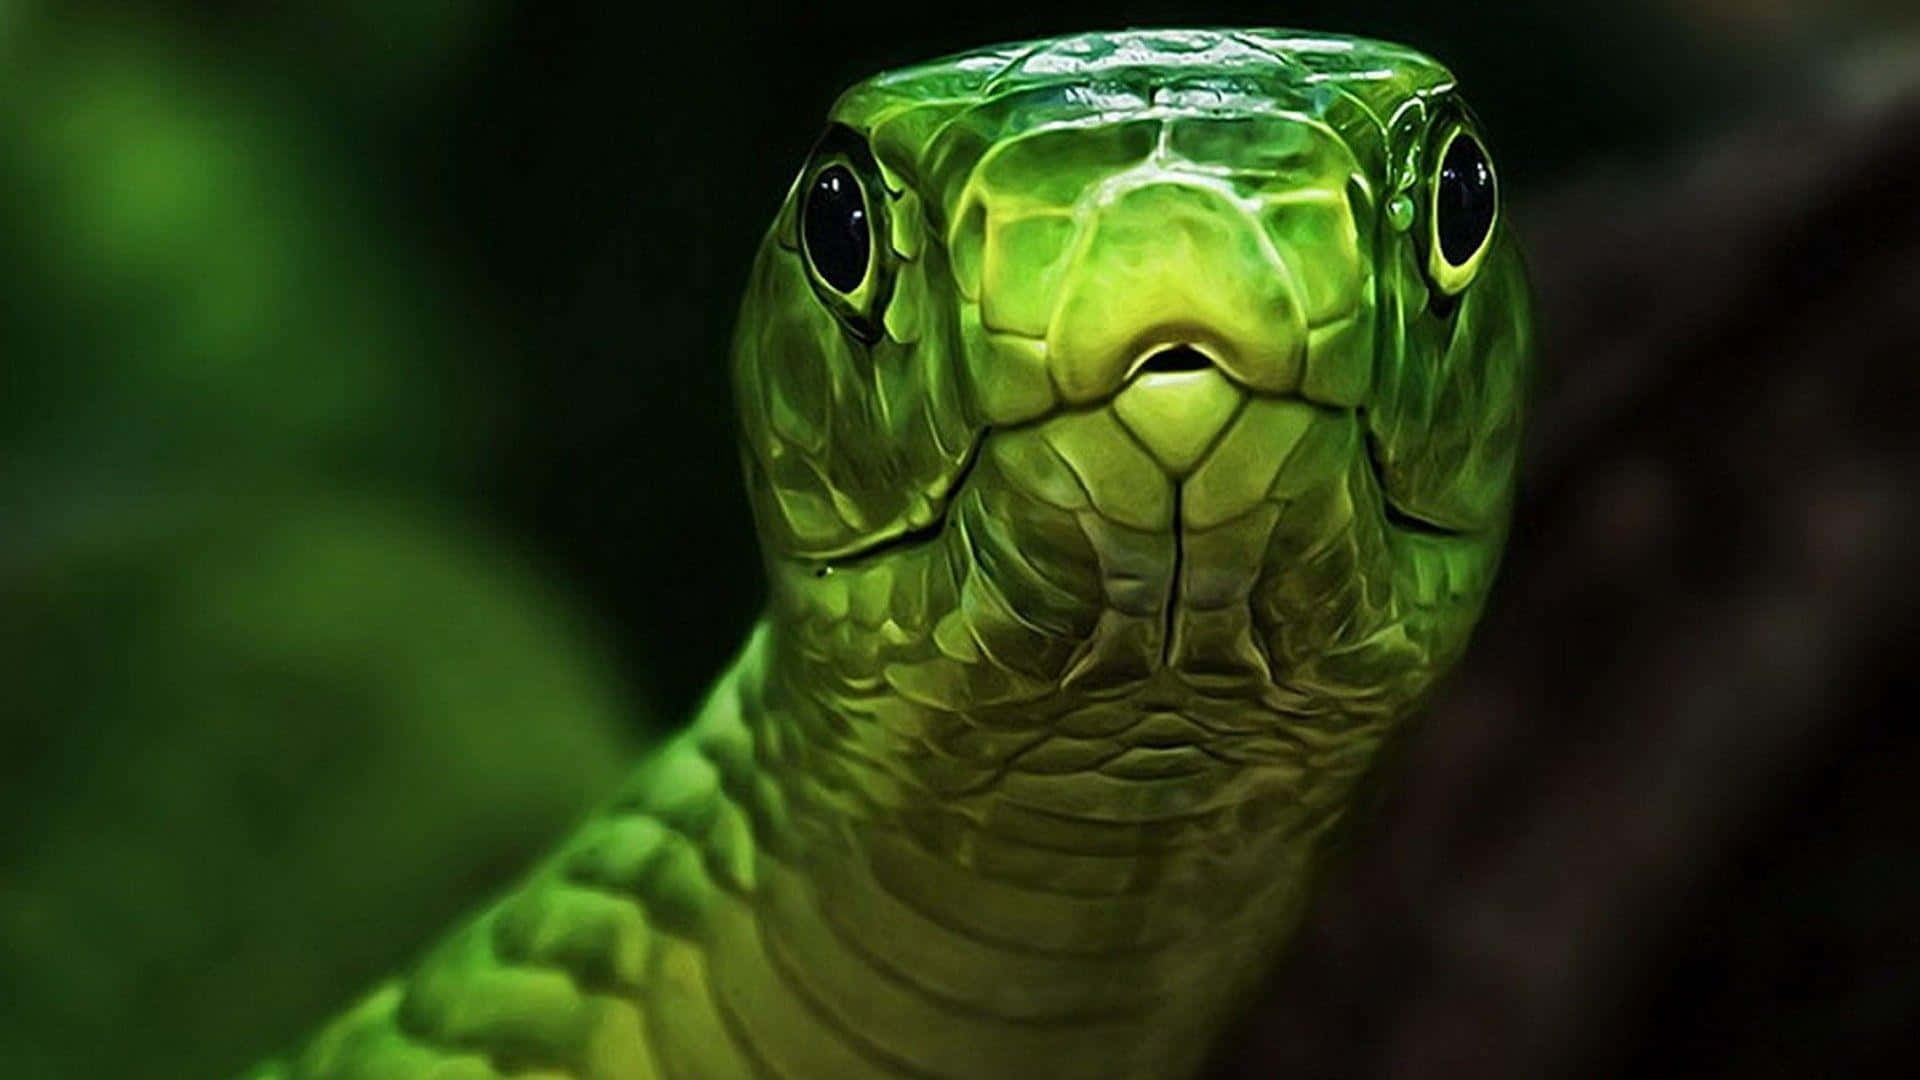 A Green Snake With A Black Head